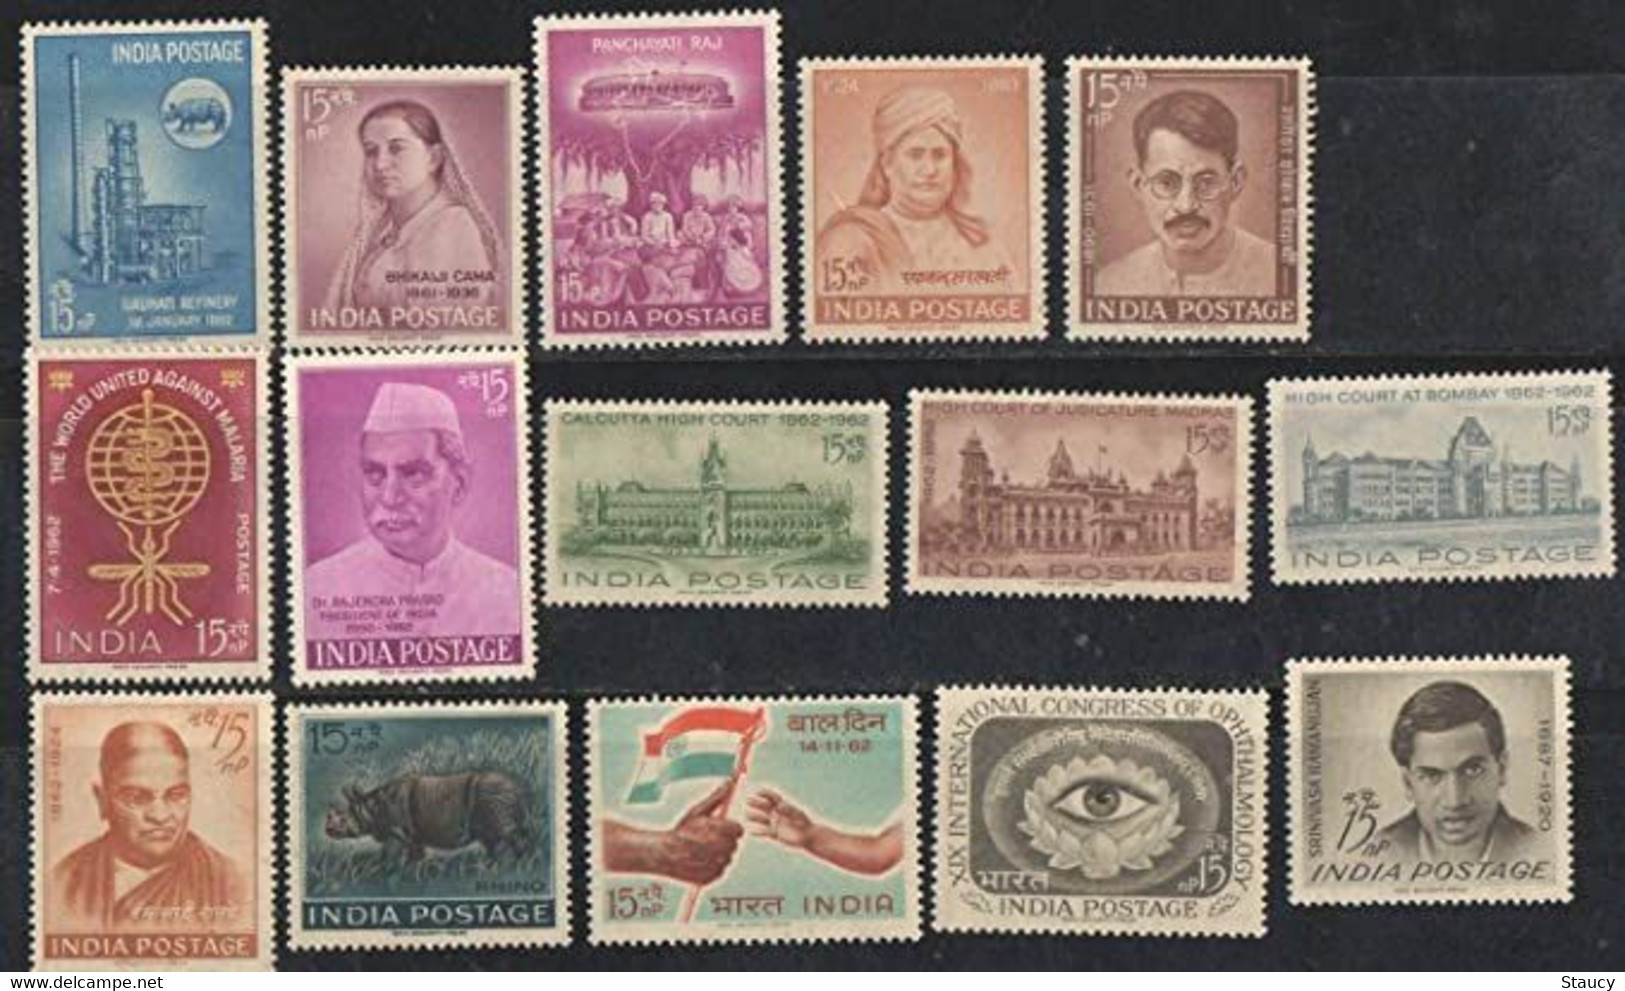 India 1962 Complete Year Pack / Set / Collection Total 15 Stamps (No Missing) MNH As Per Scan - Años Completos